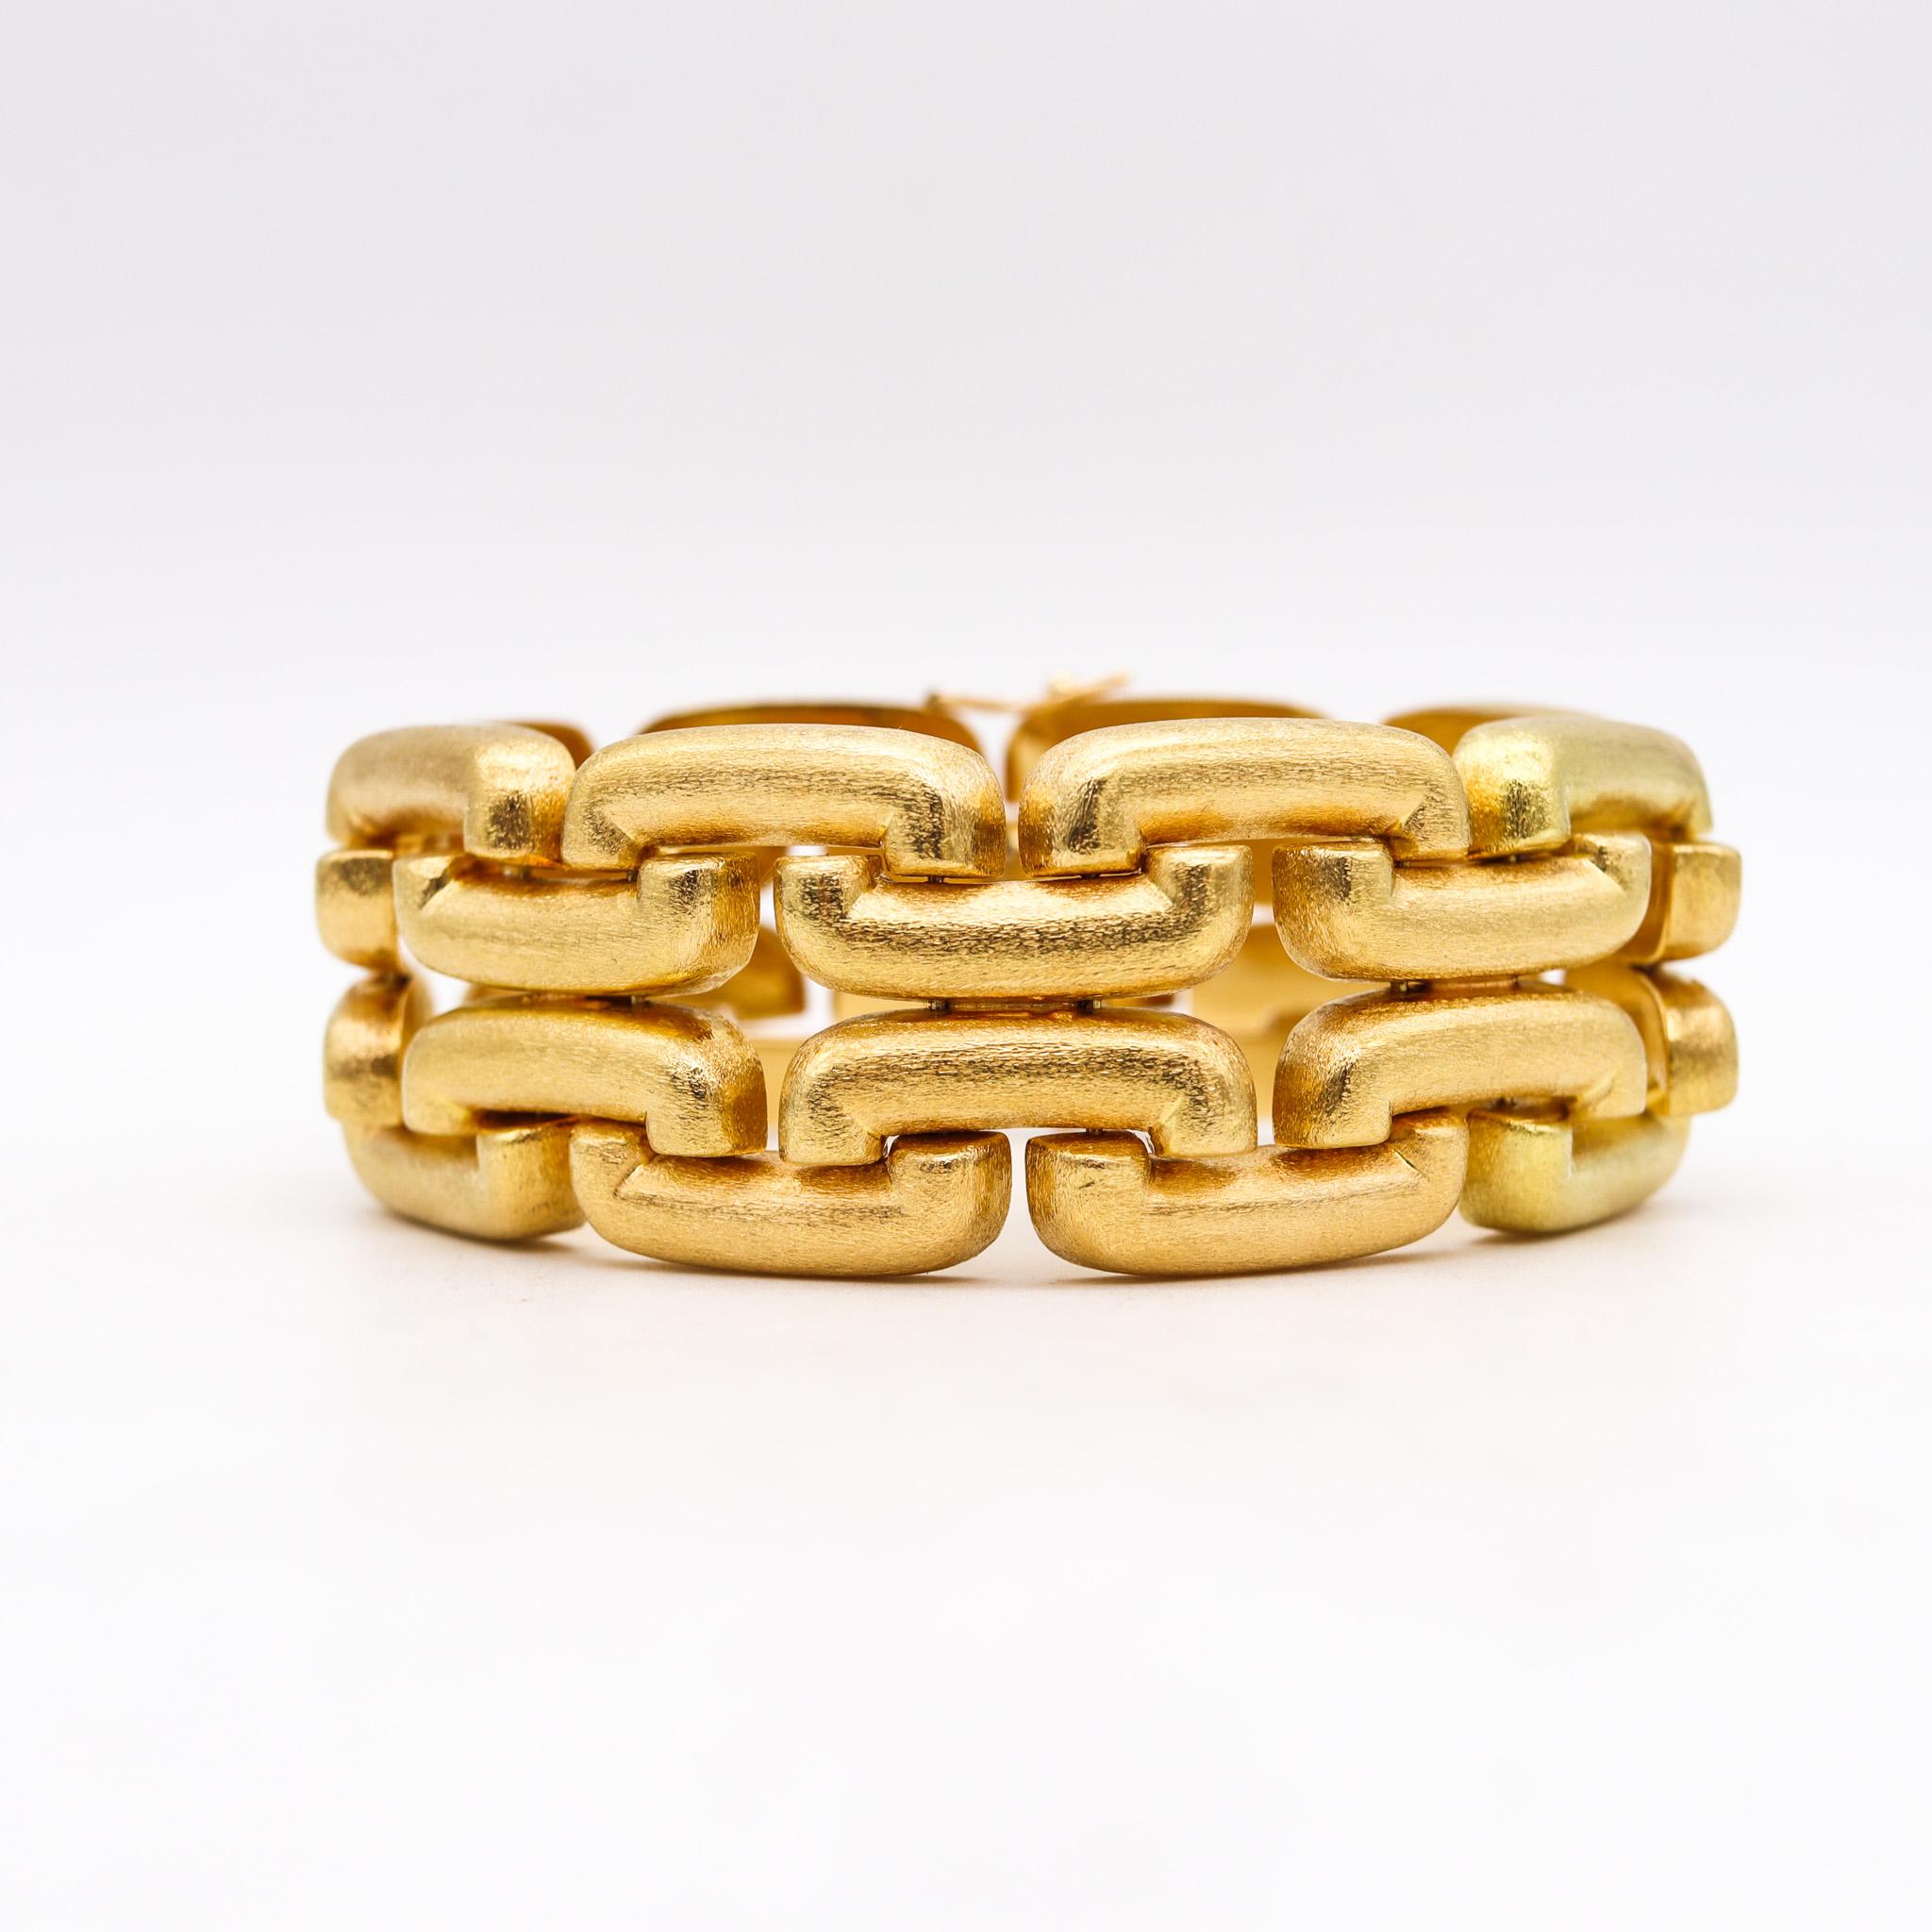 Italian mid century geometric bracelet.

Beautiful geometric piece, created in Vicenza Italy during the post war and the mid century periods, back in the 1950. This bracelet has been crafted with bold Greek inspired links in solid yellow gold of 18